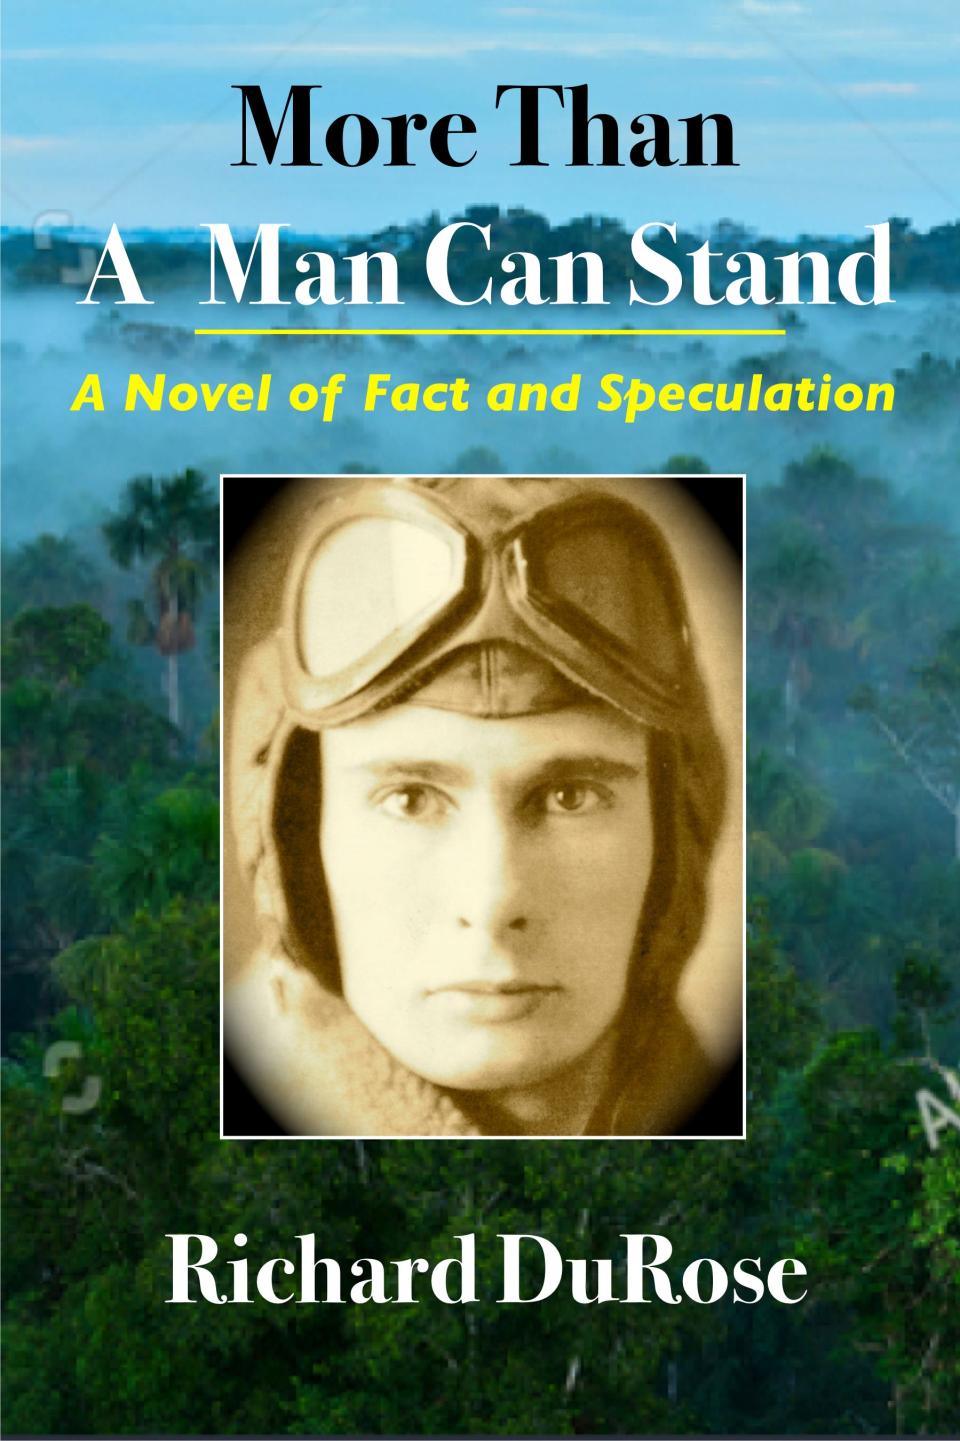 The front cover of local author Richard "Dick" DuRose's new book More Than A Man Can Stand.